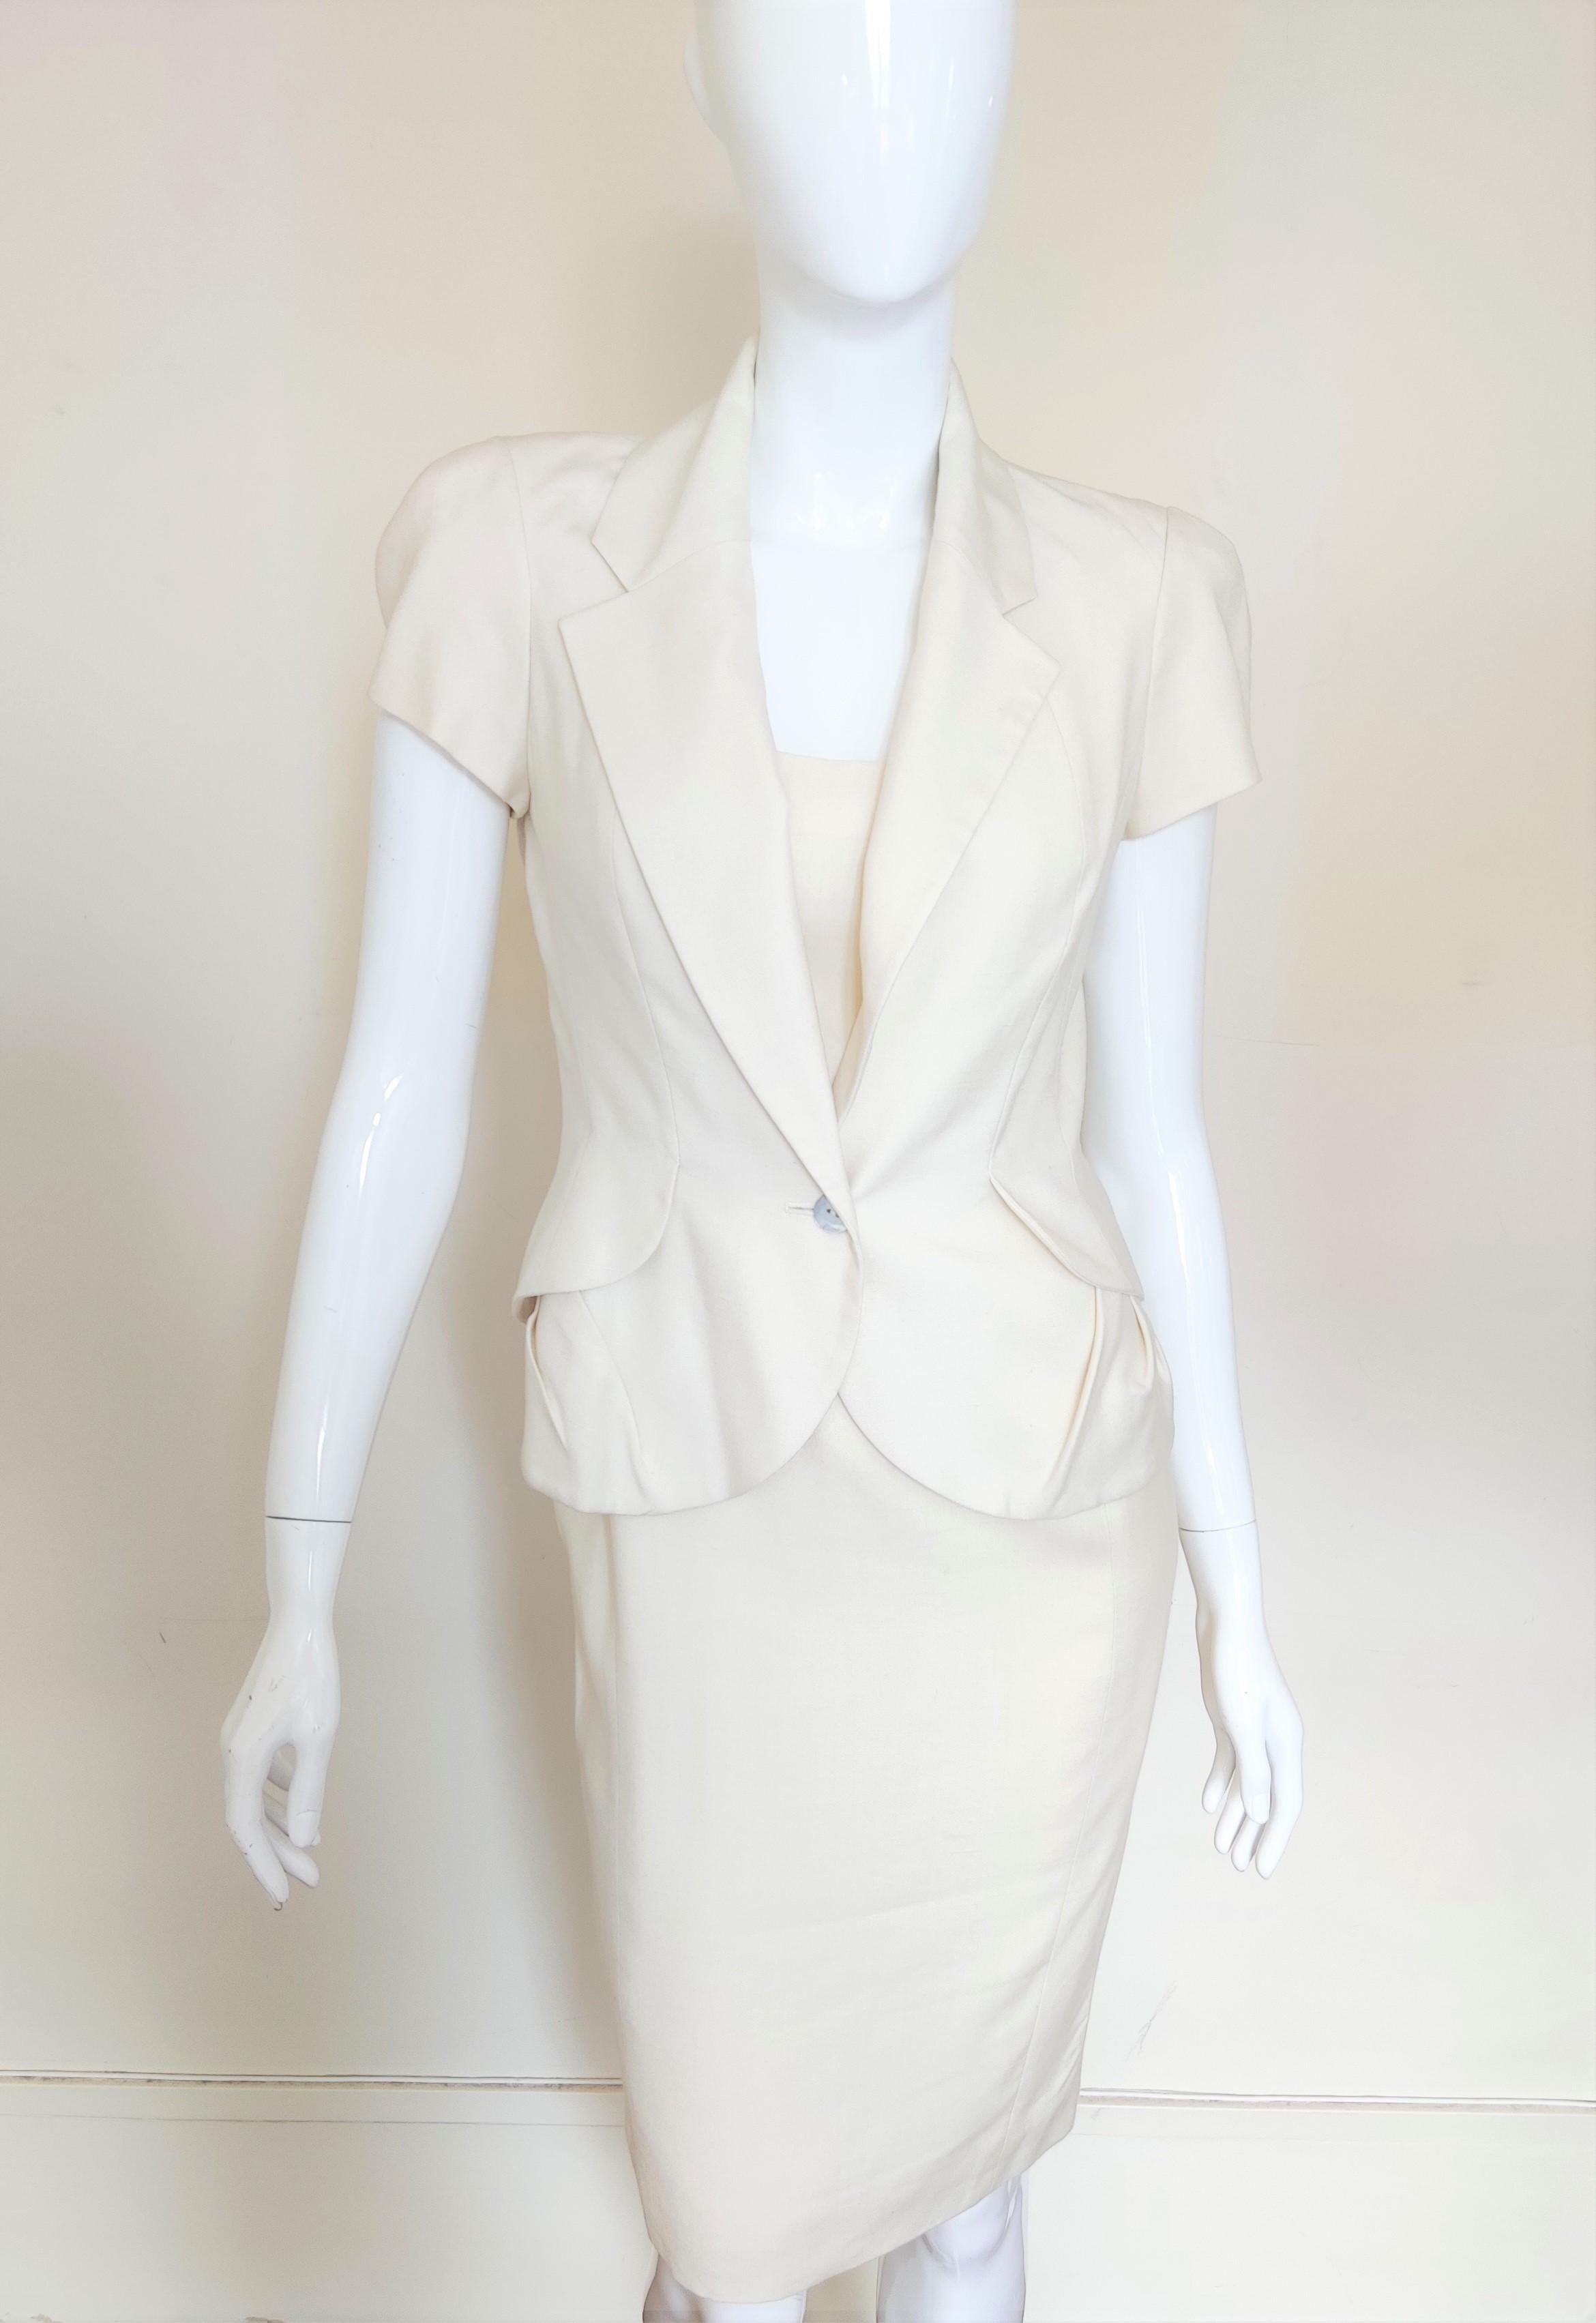 Early John Galliano S/S 1999 Runway Vintage Ivory Ensemble Dress Costume Suit In Excellent Condition For Sale In PARIS, FR